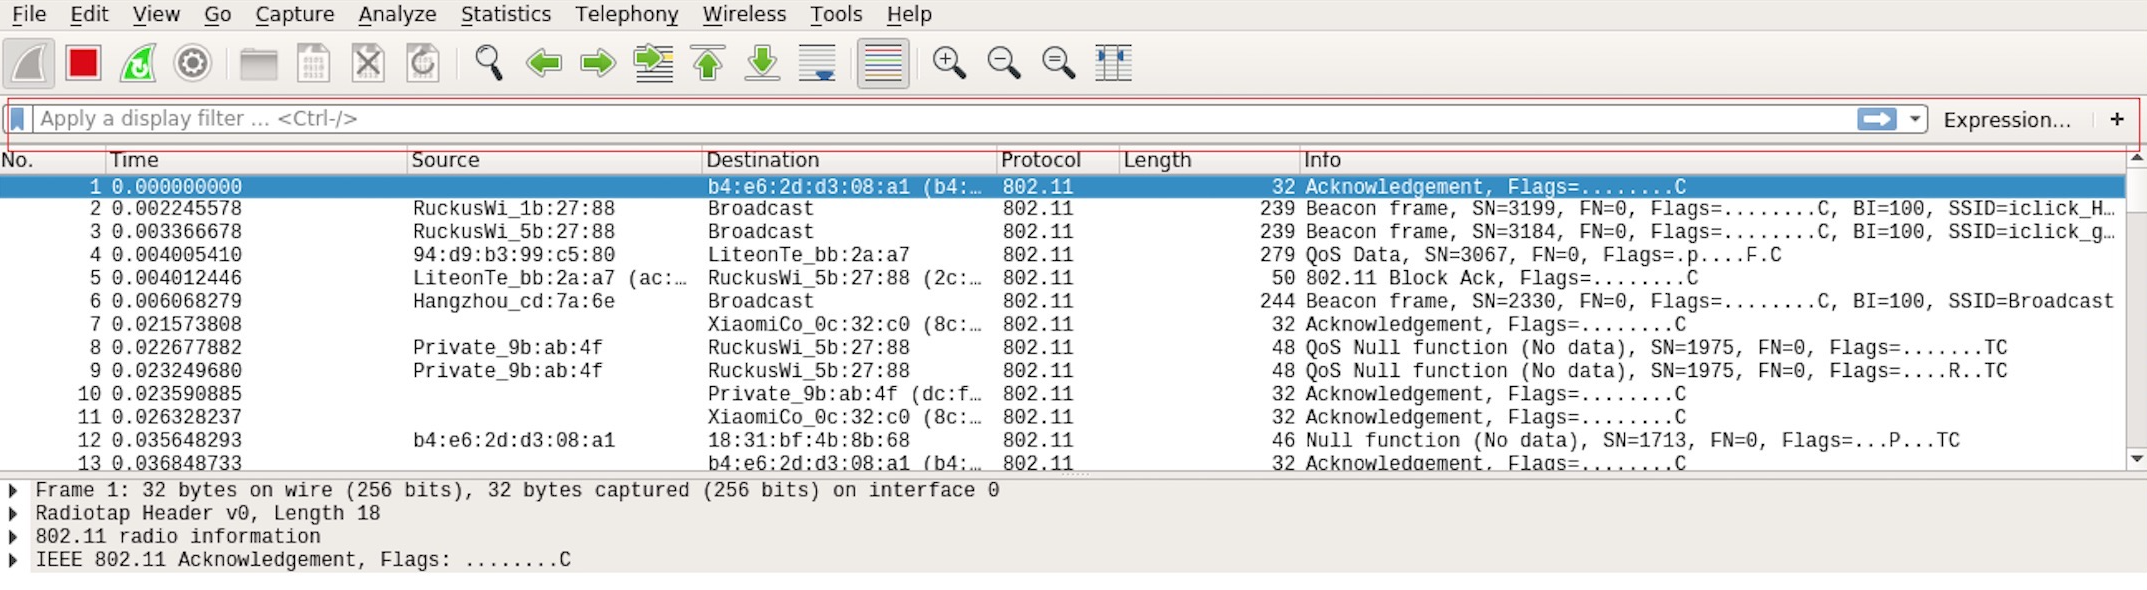 Setting up Filters in Wireshark